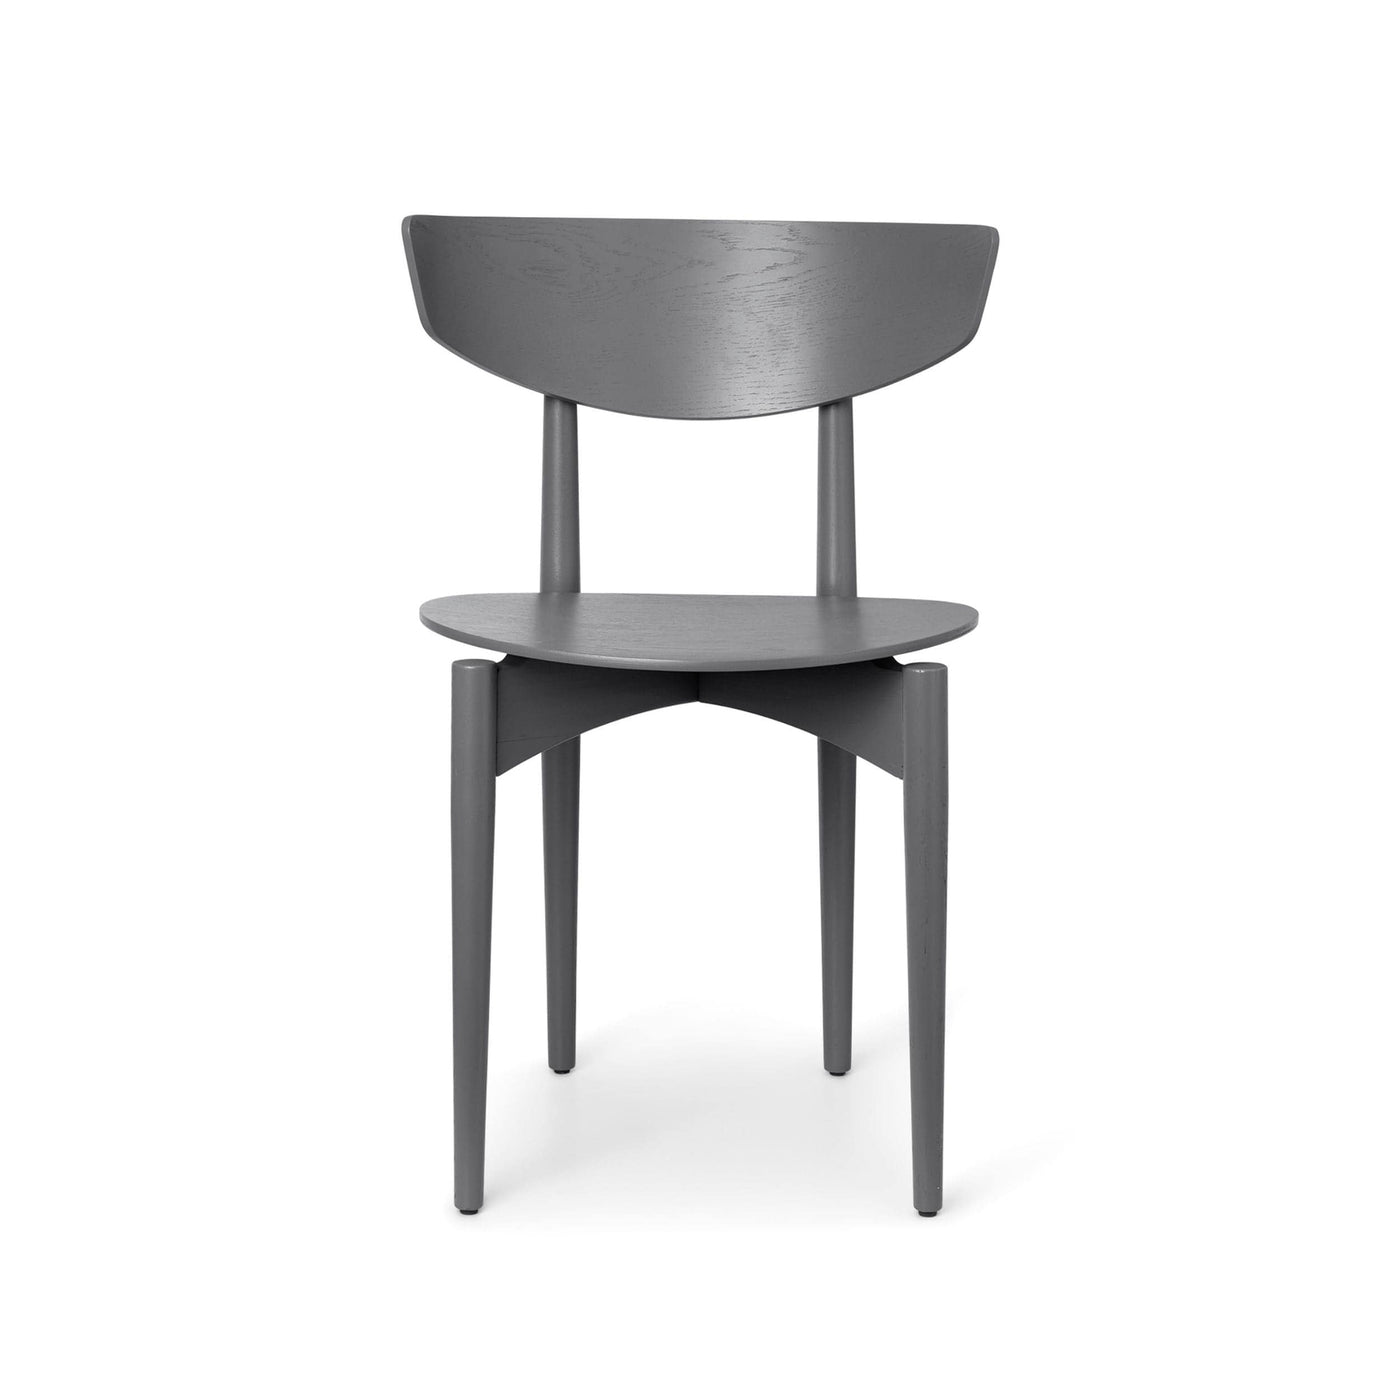 Ferm Living Herman Dining Chair Wood Frame. Shop online at someday designs. #colour_warm-grey